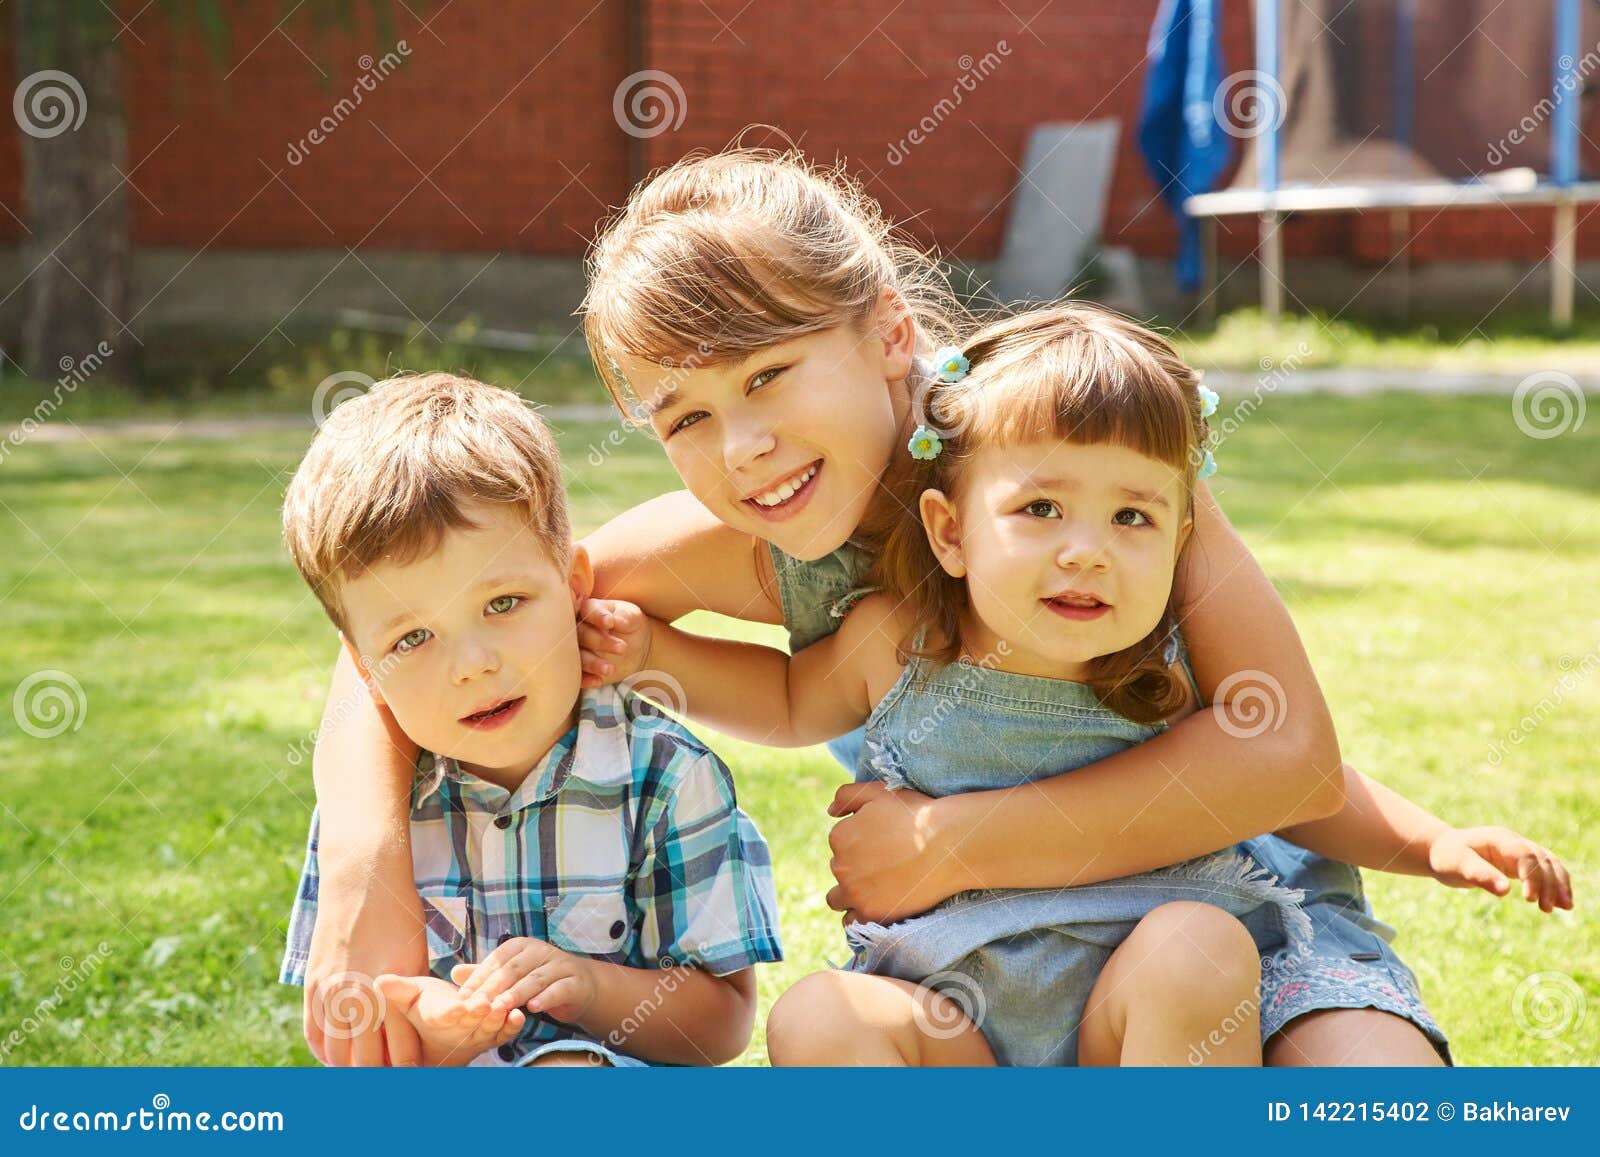 Happy Playful Children Outdoors in the Summer on Grass in a Backyard